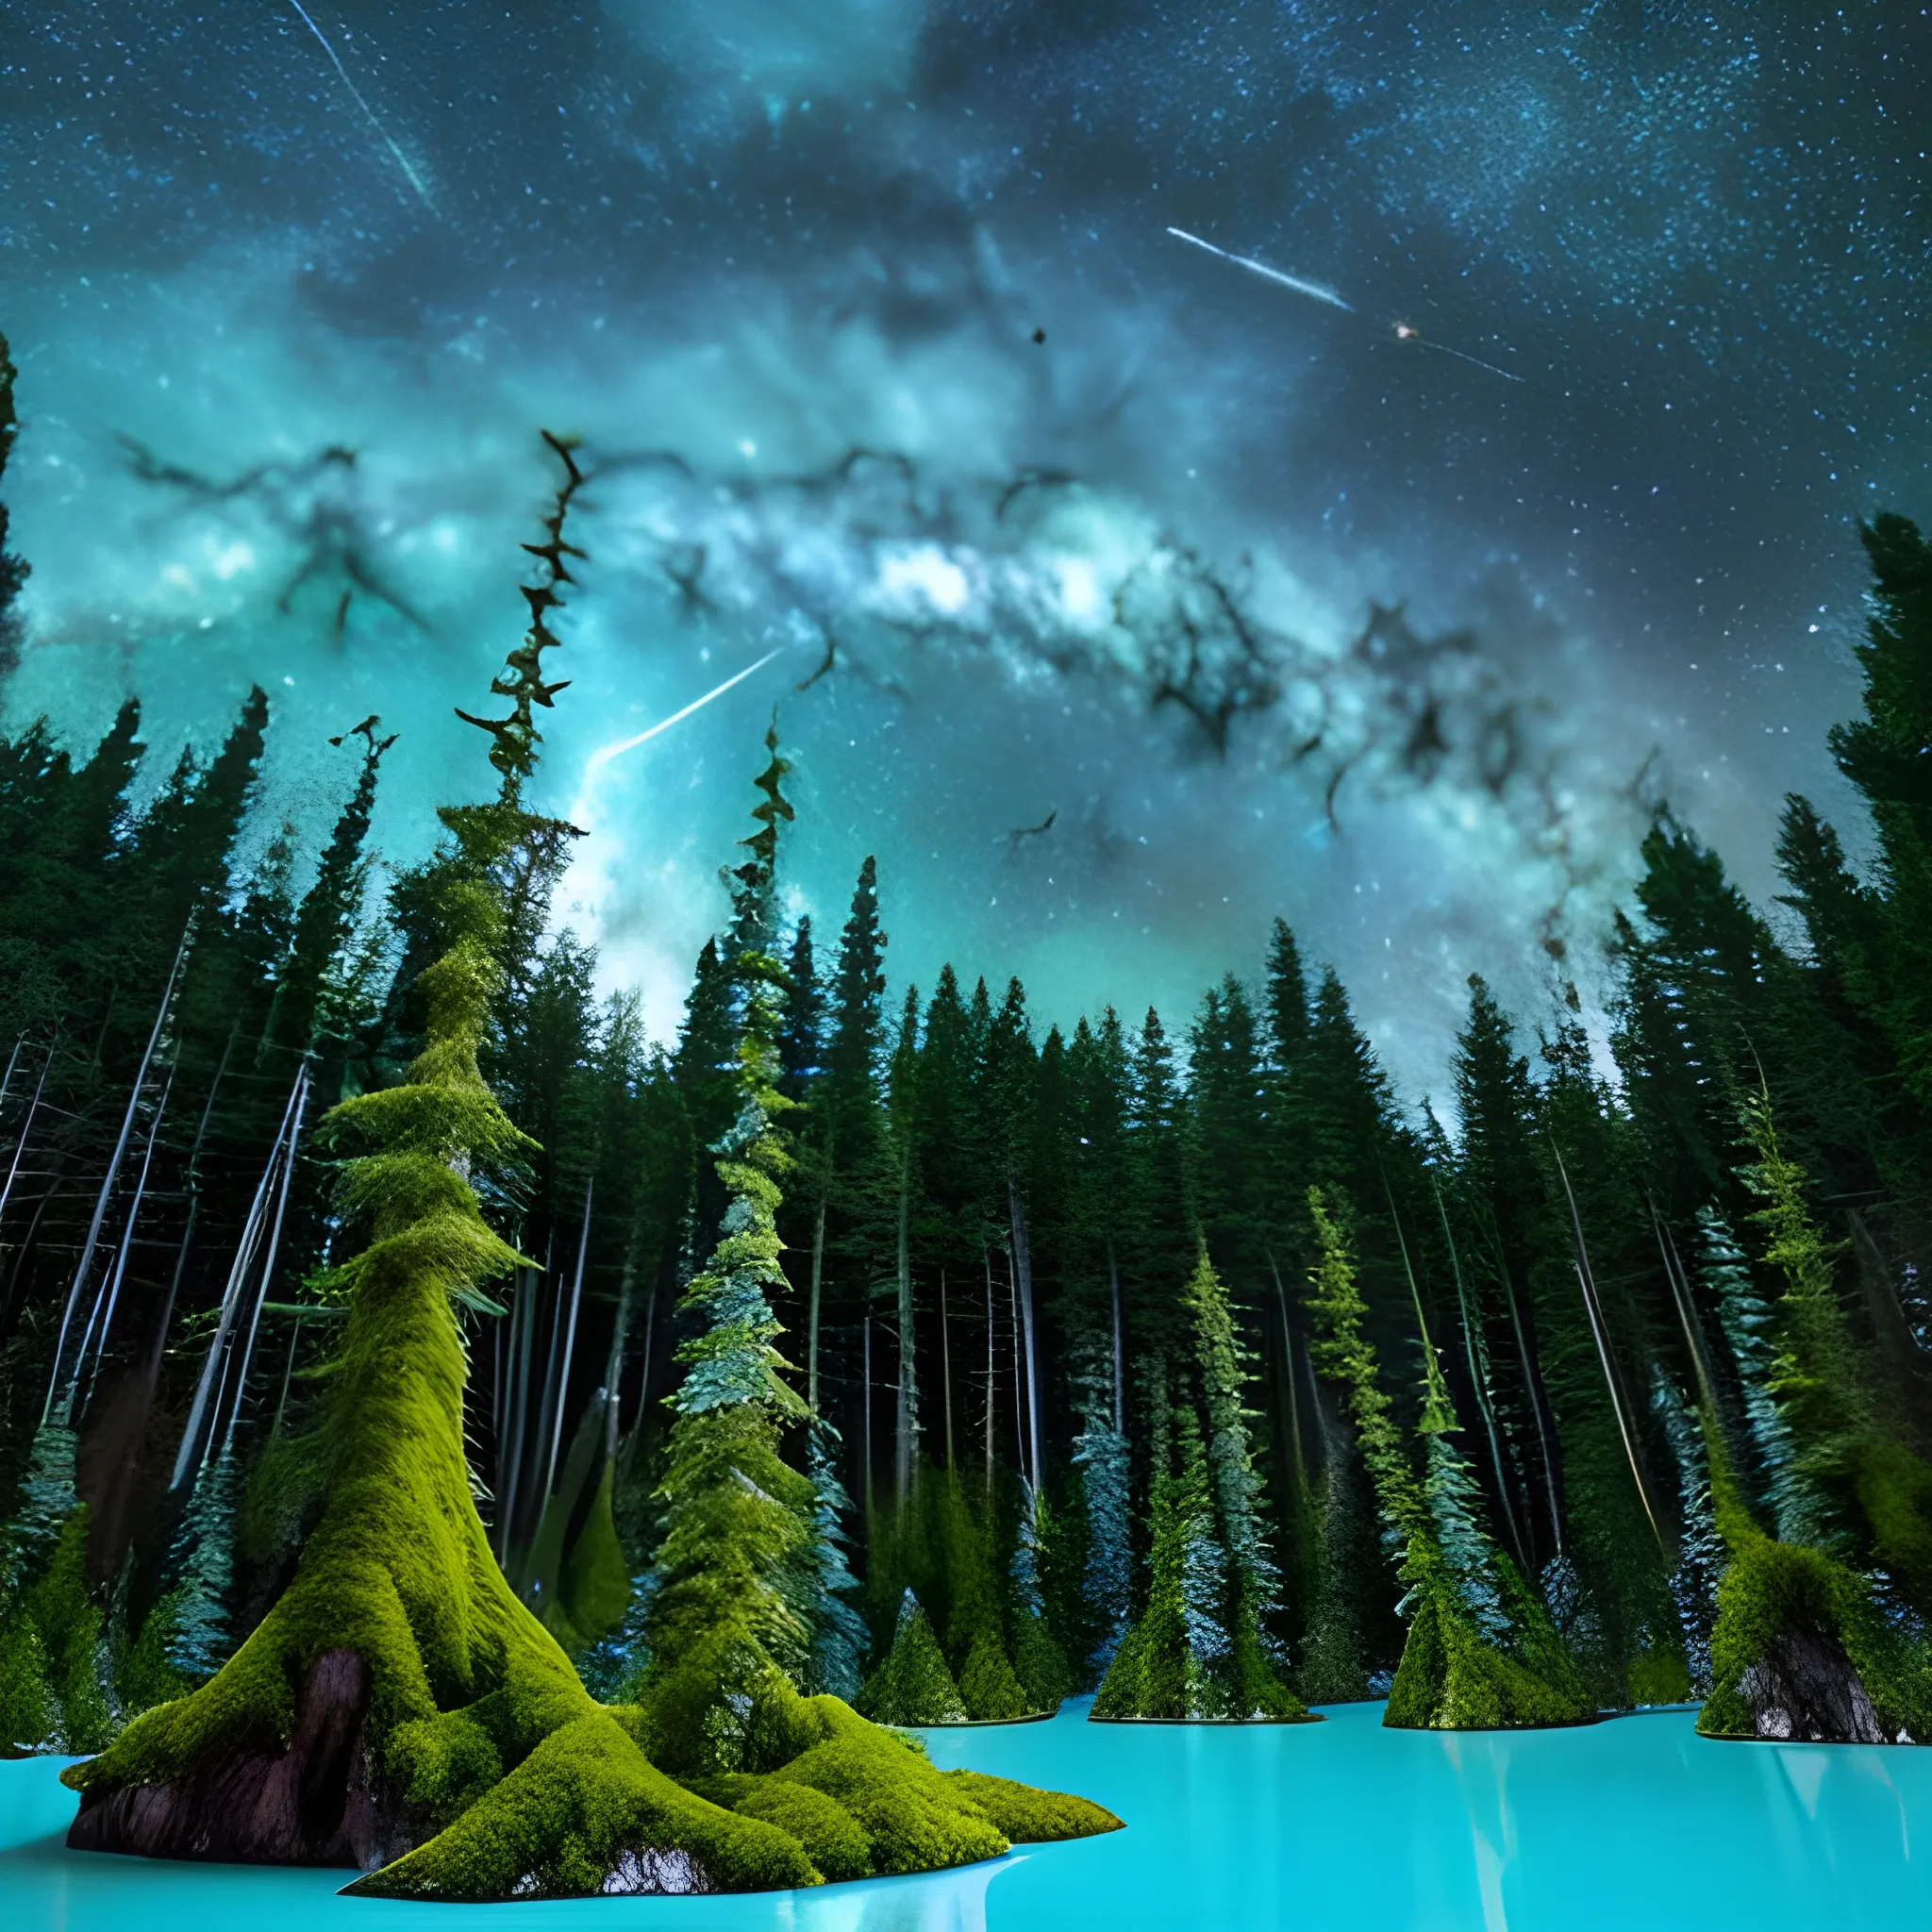 turquoise lake surrounded by trees covered with millennial moss, starry sky with galaxies and spaceships crossing space in the background, Trippy